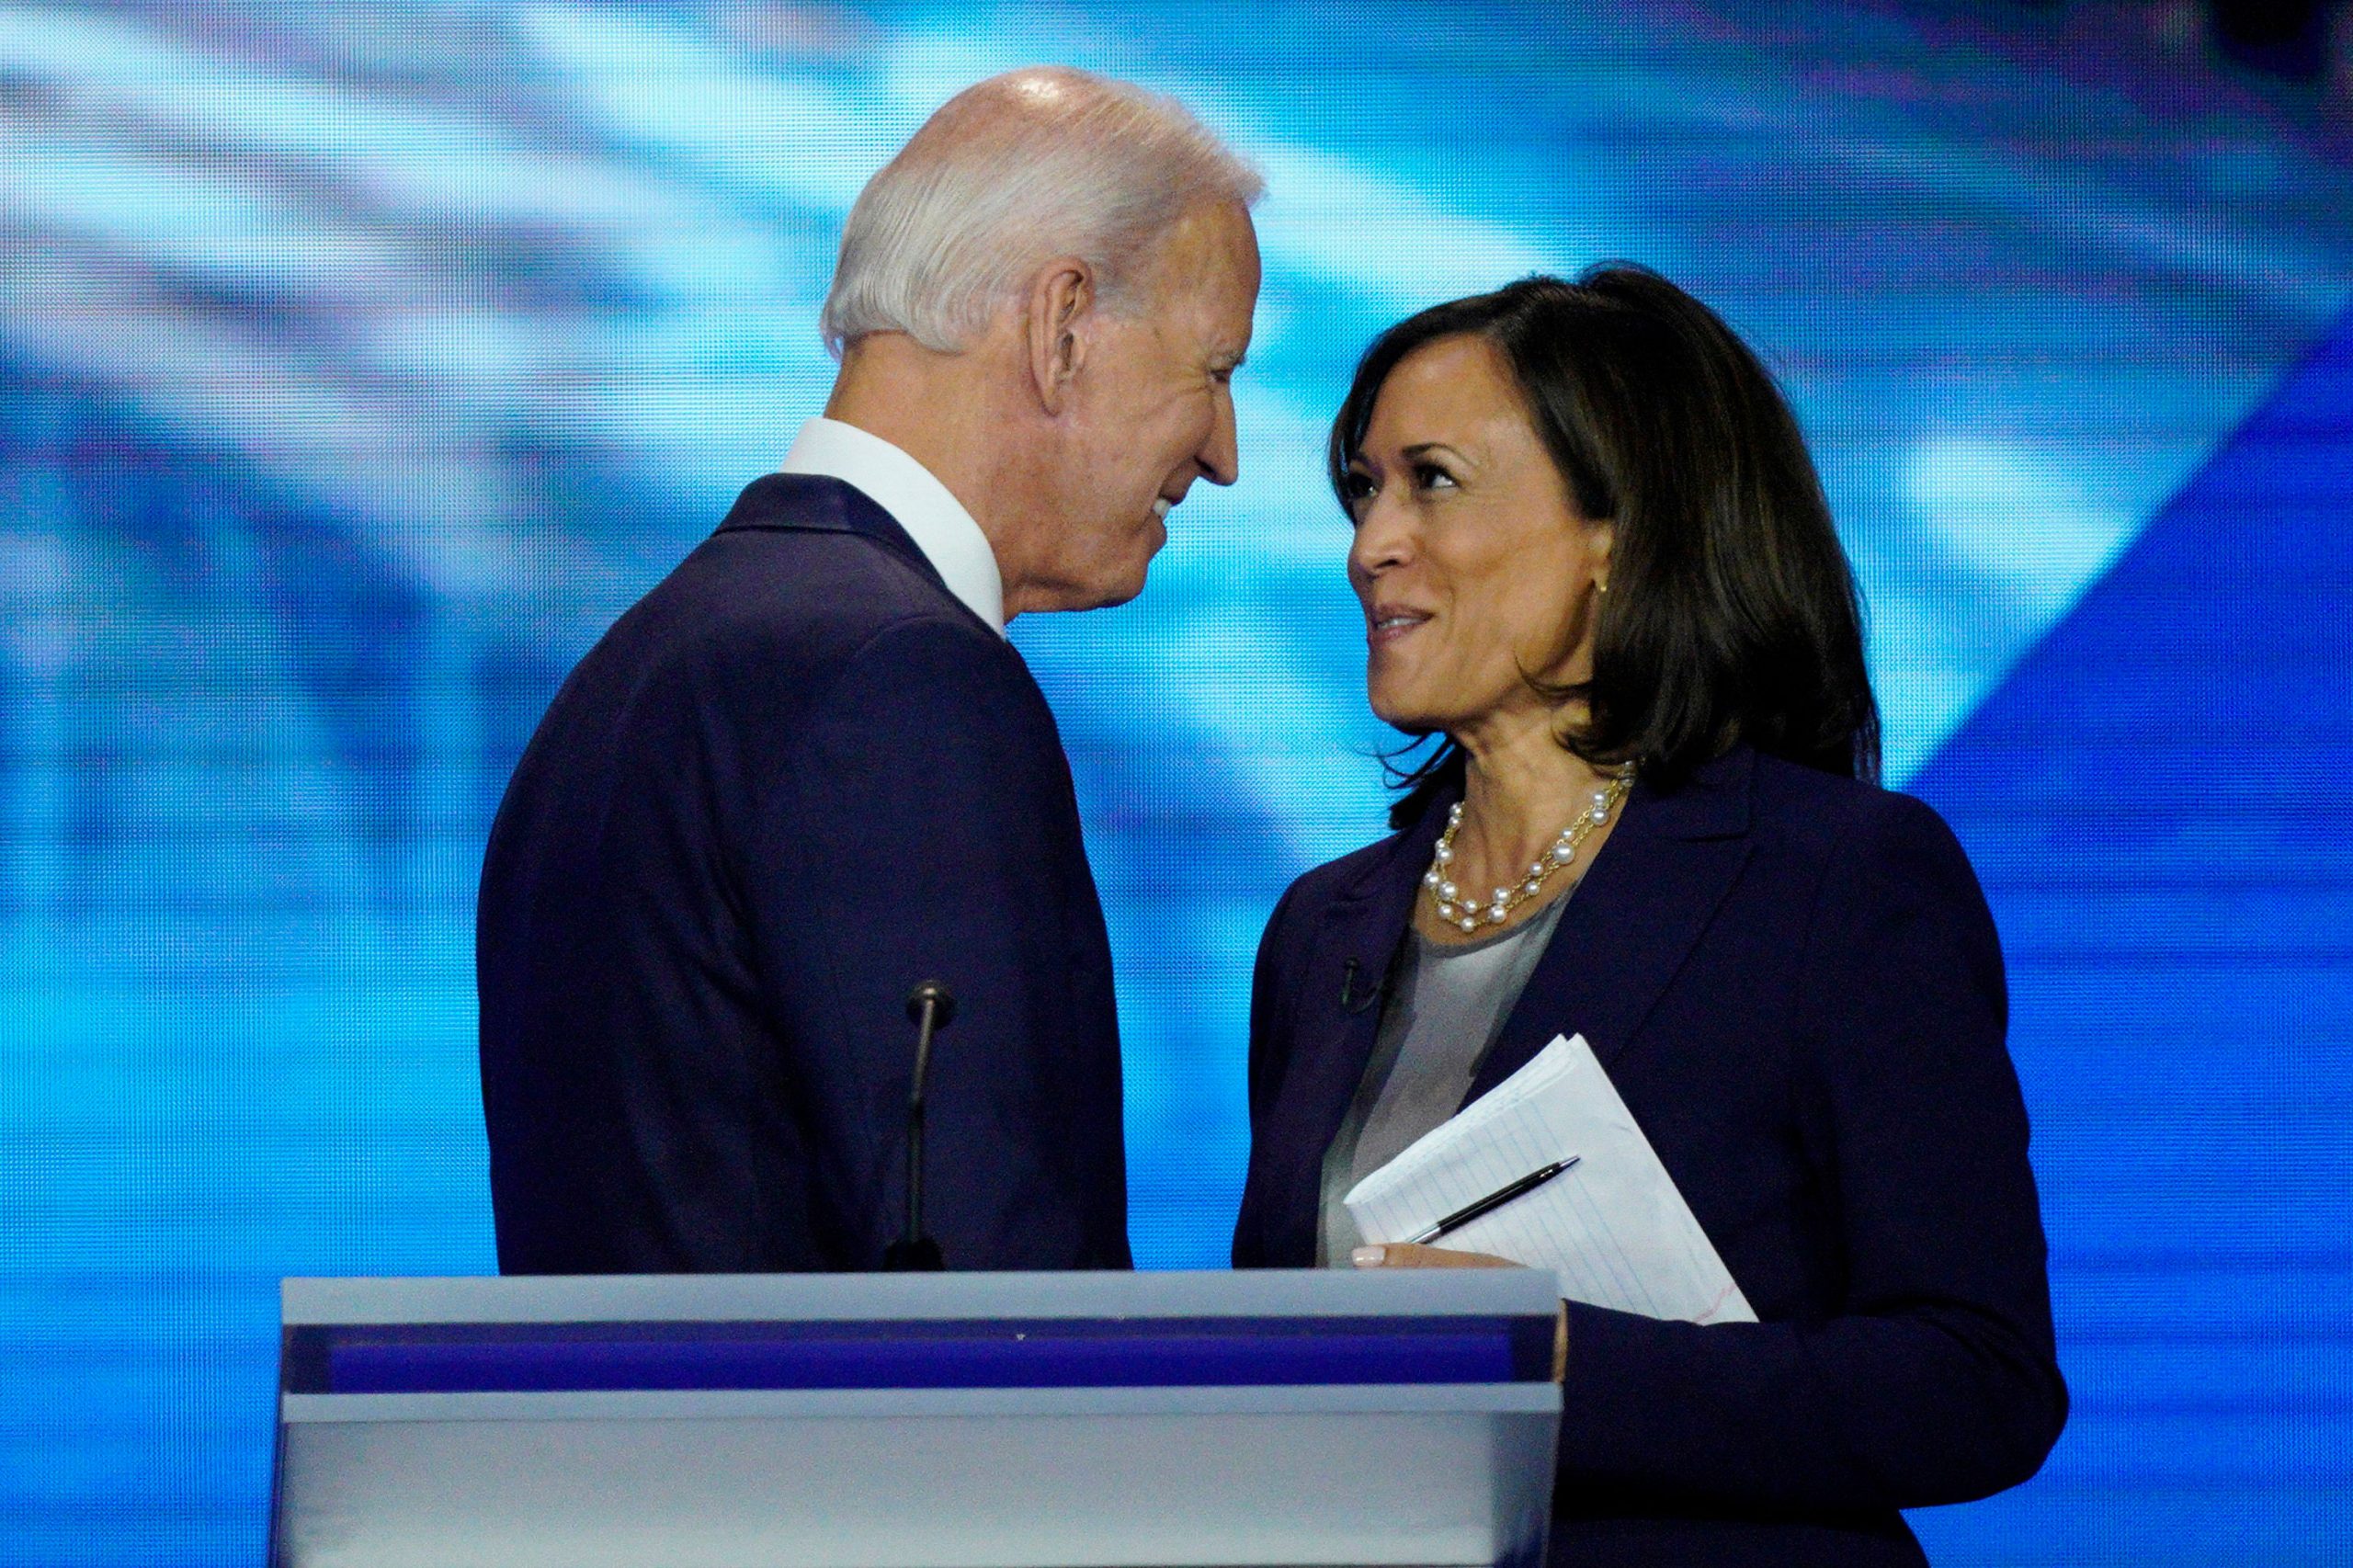 ‘First of many chapters in US history’: Kamala Harris as V-P was long overdue, says Biden